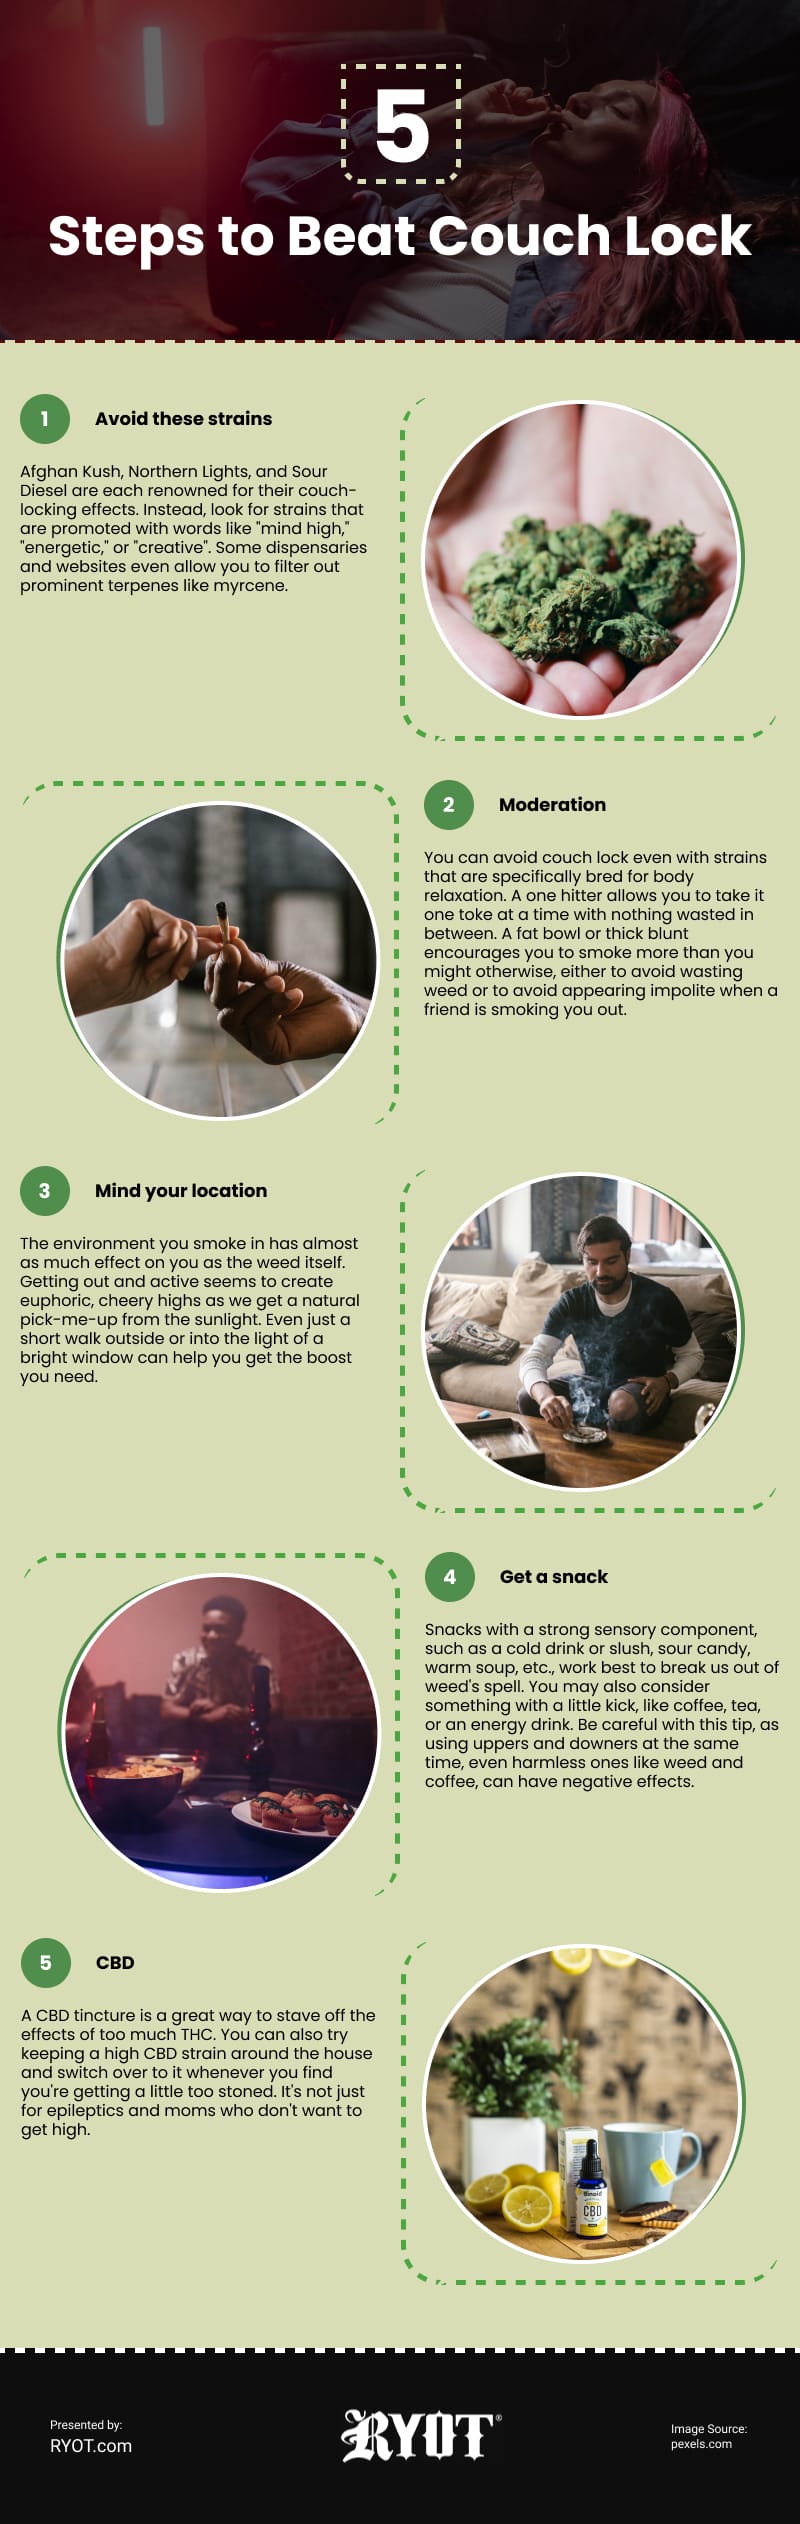 5 Steps to Beat Couch Lock Infographic